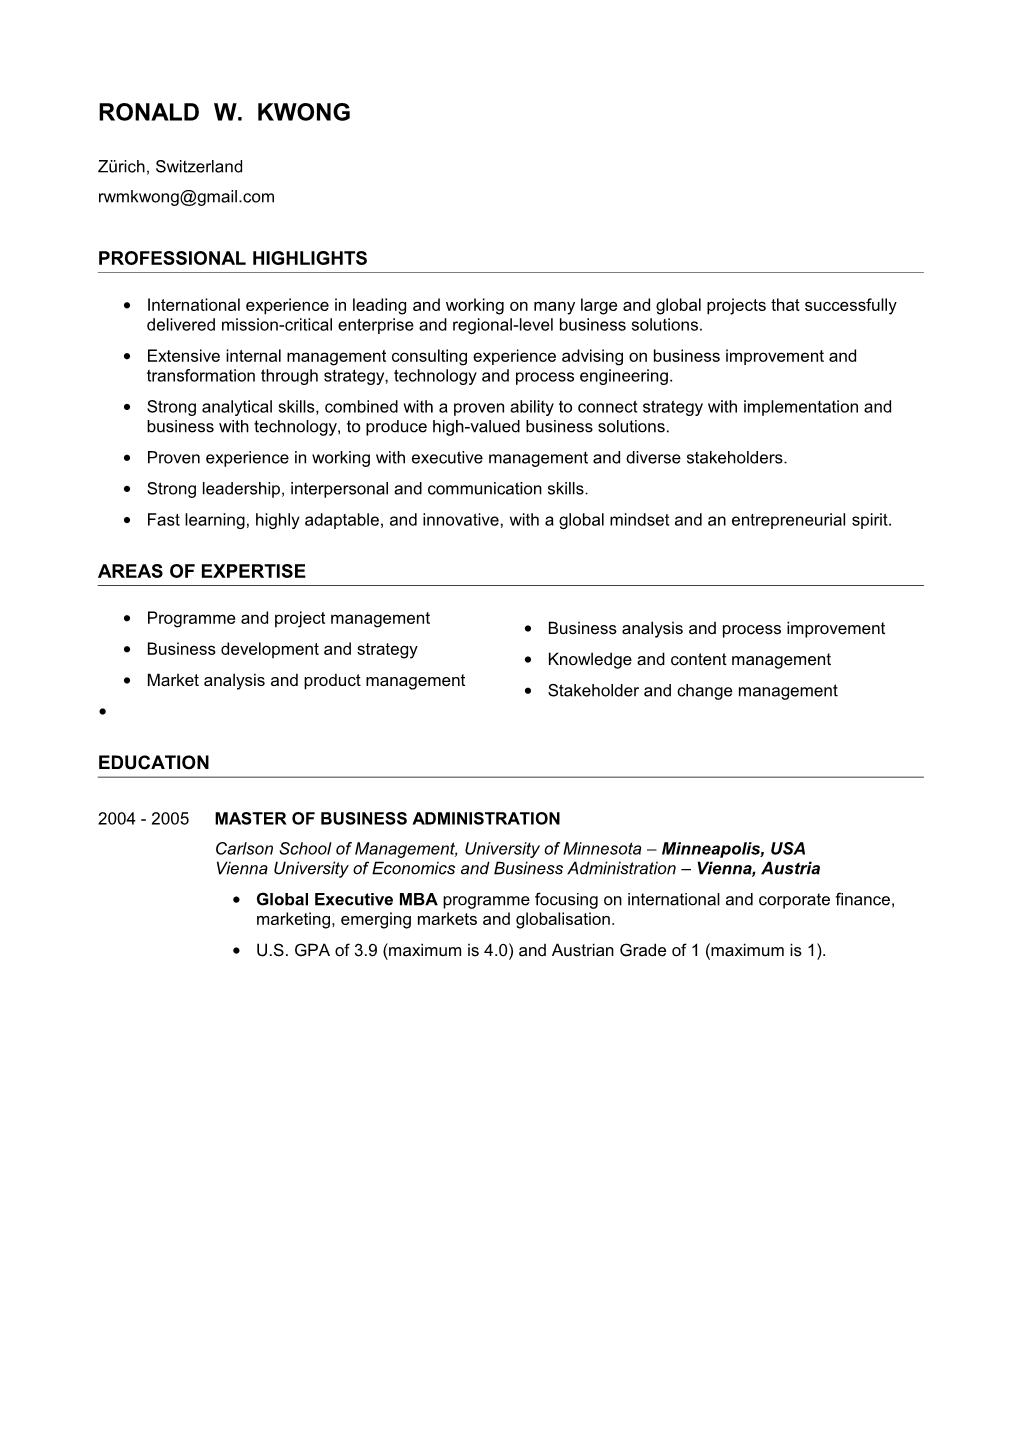 Curriculum Vitae / Resume for Ronald W. Kwong